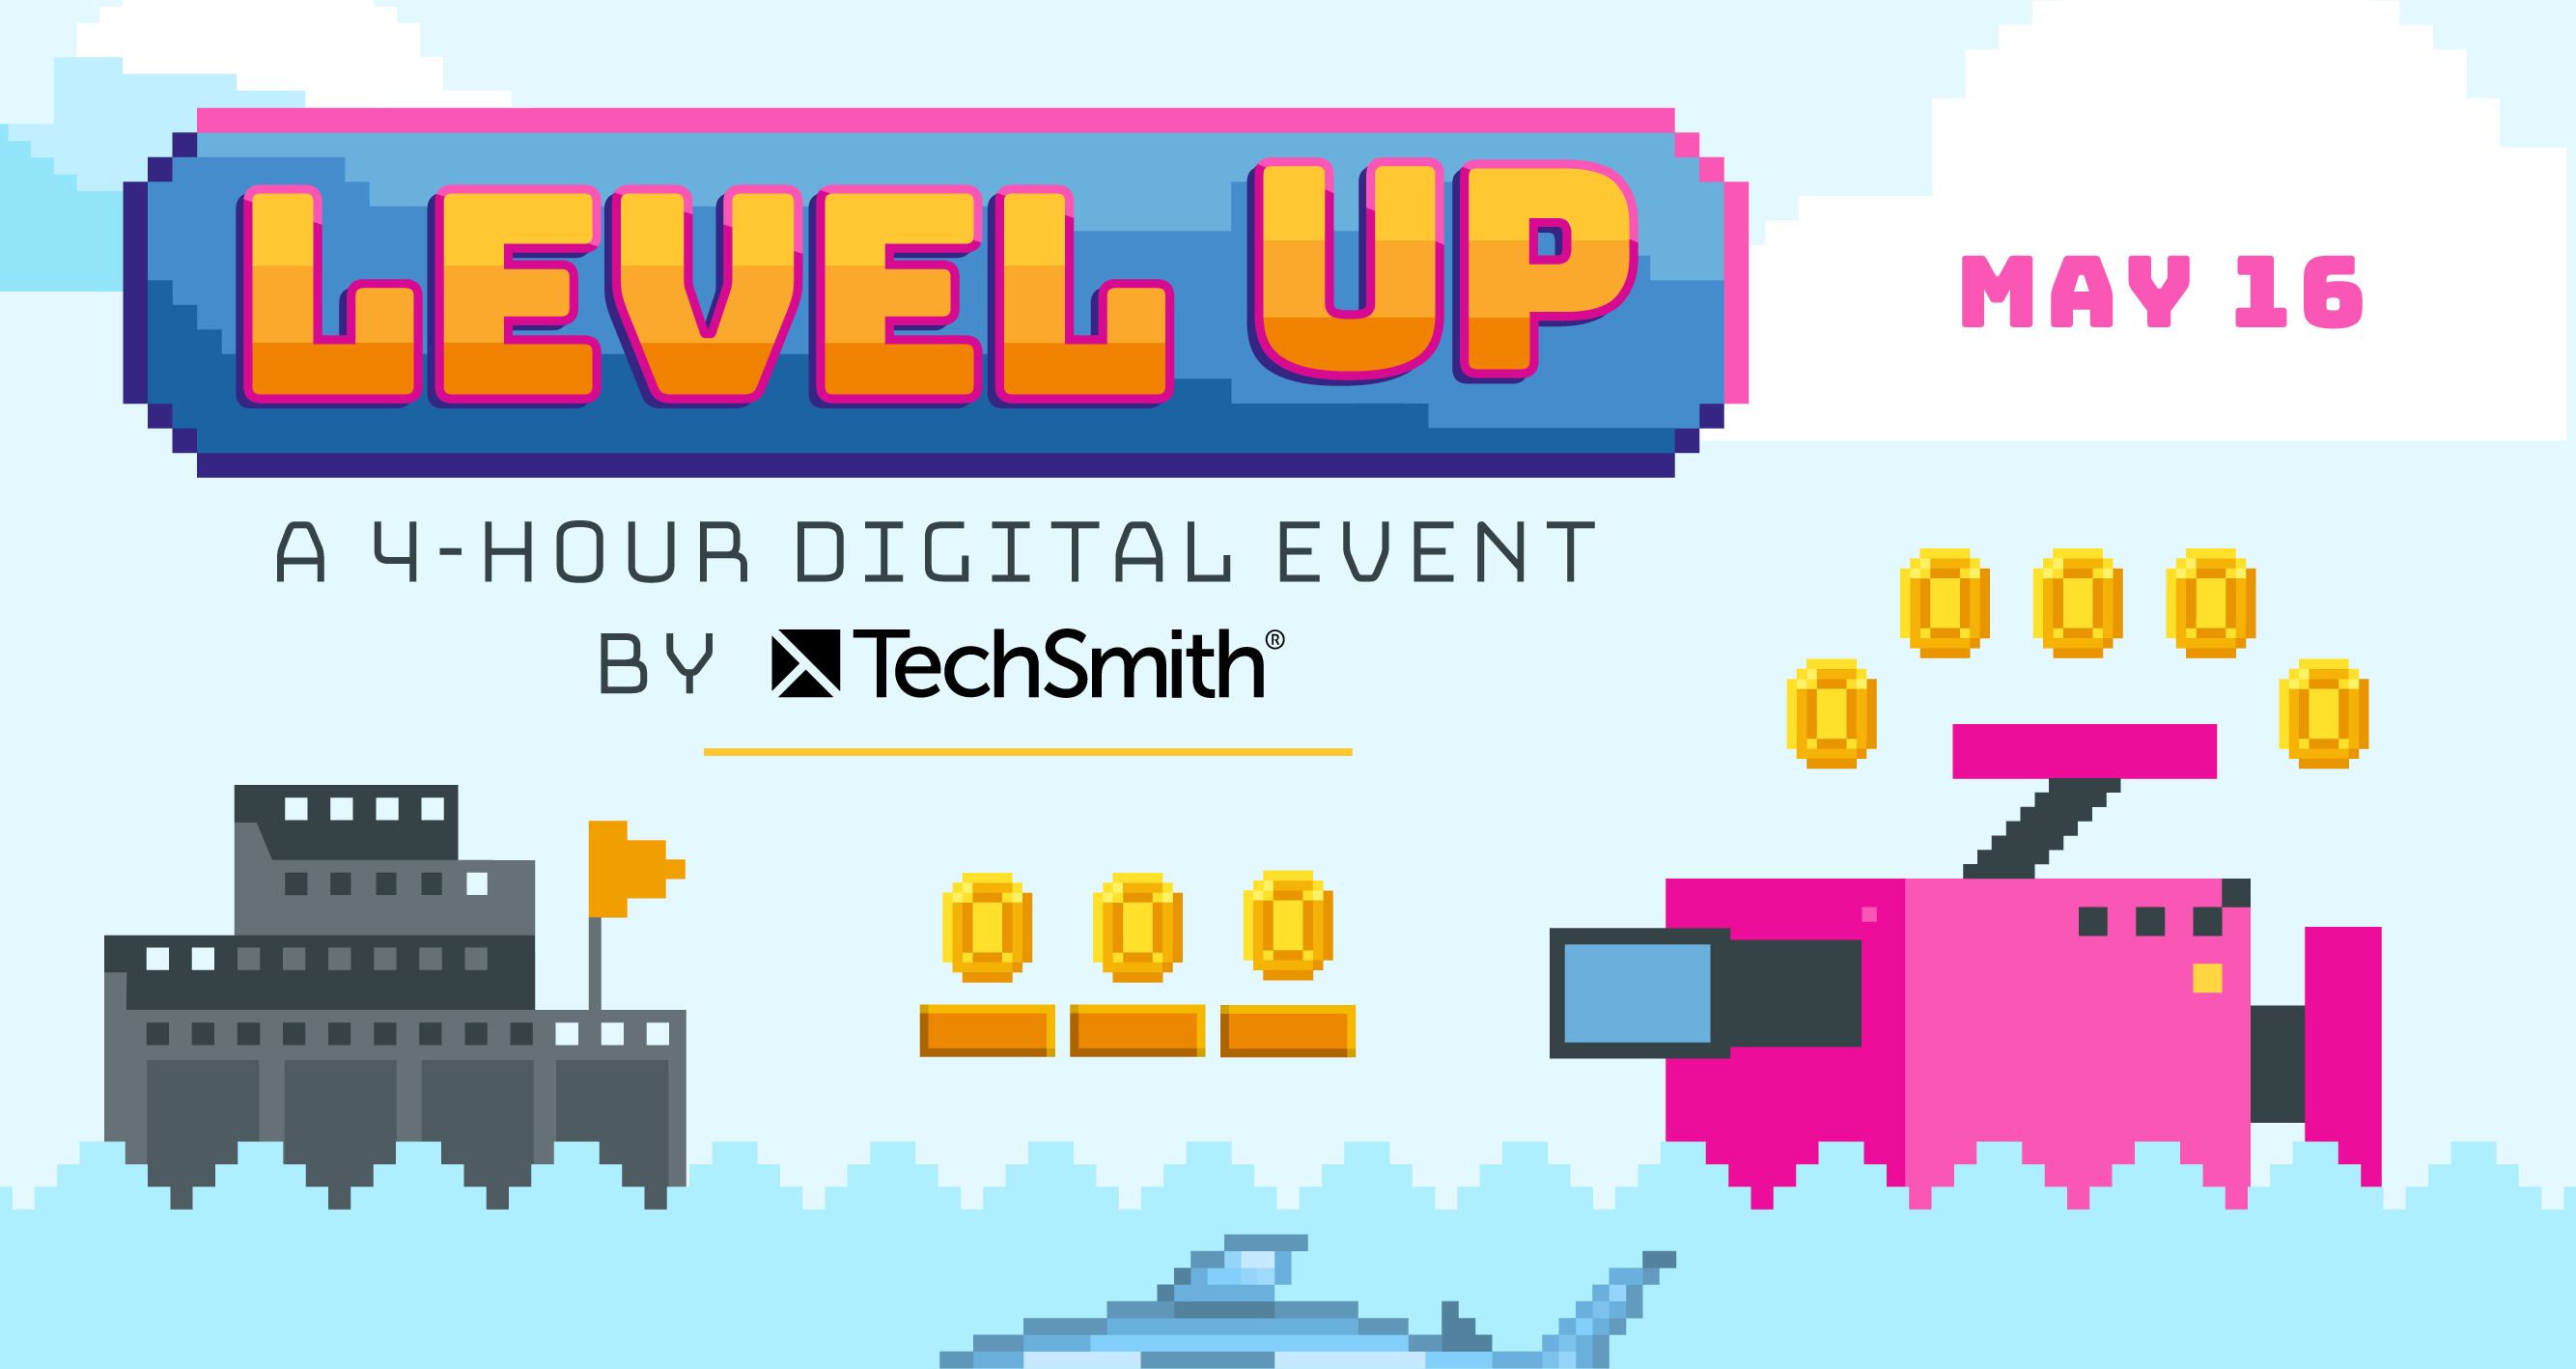 Level Up: A 4-hour Digital Event by TechSmith | May 16